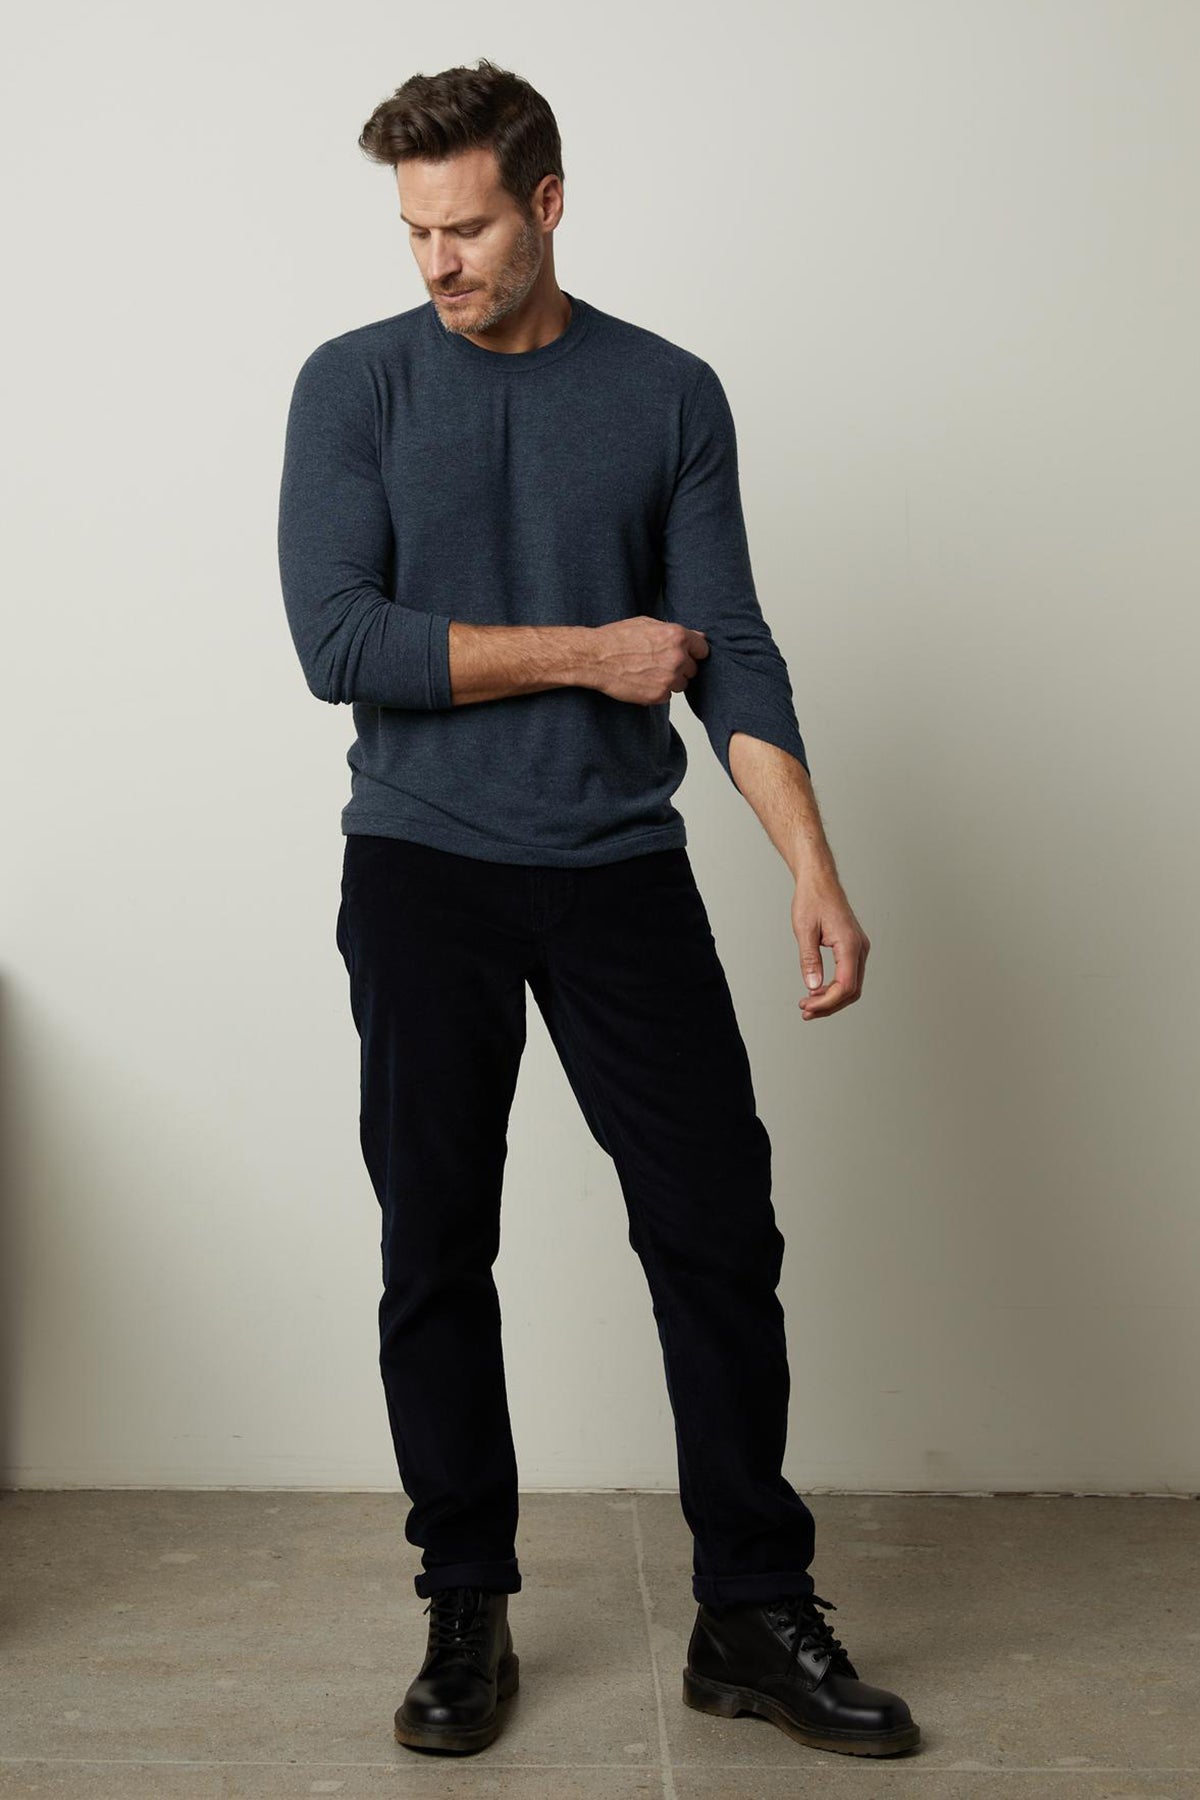 A man wearing the Velvet by Graham & Spencer BECKER COZY JERSEY CREW blue sweater and black pants.-36320567918785